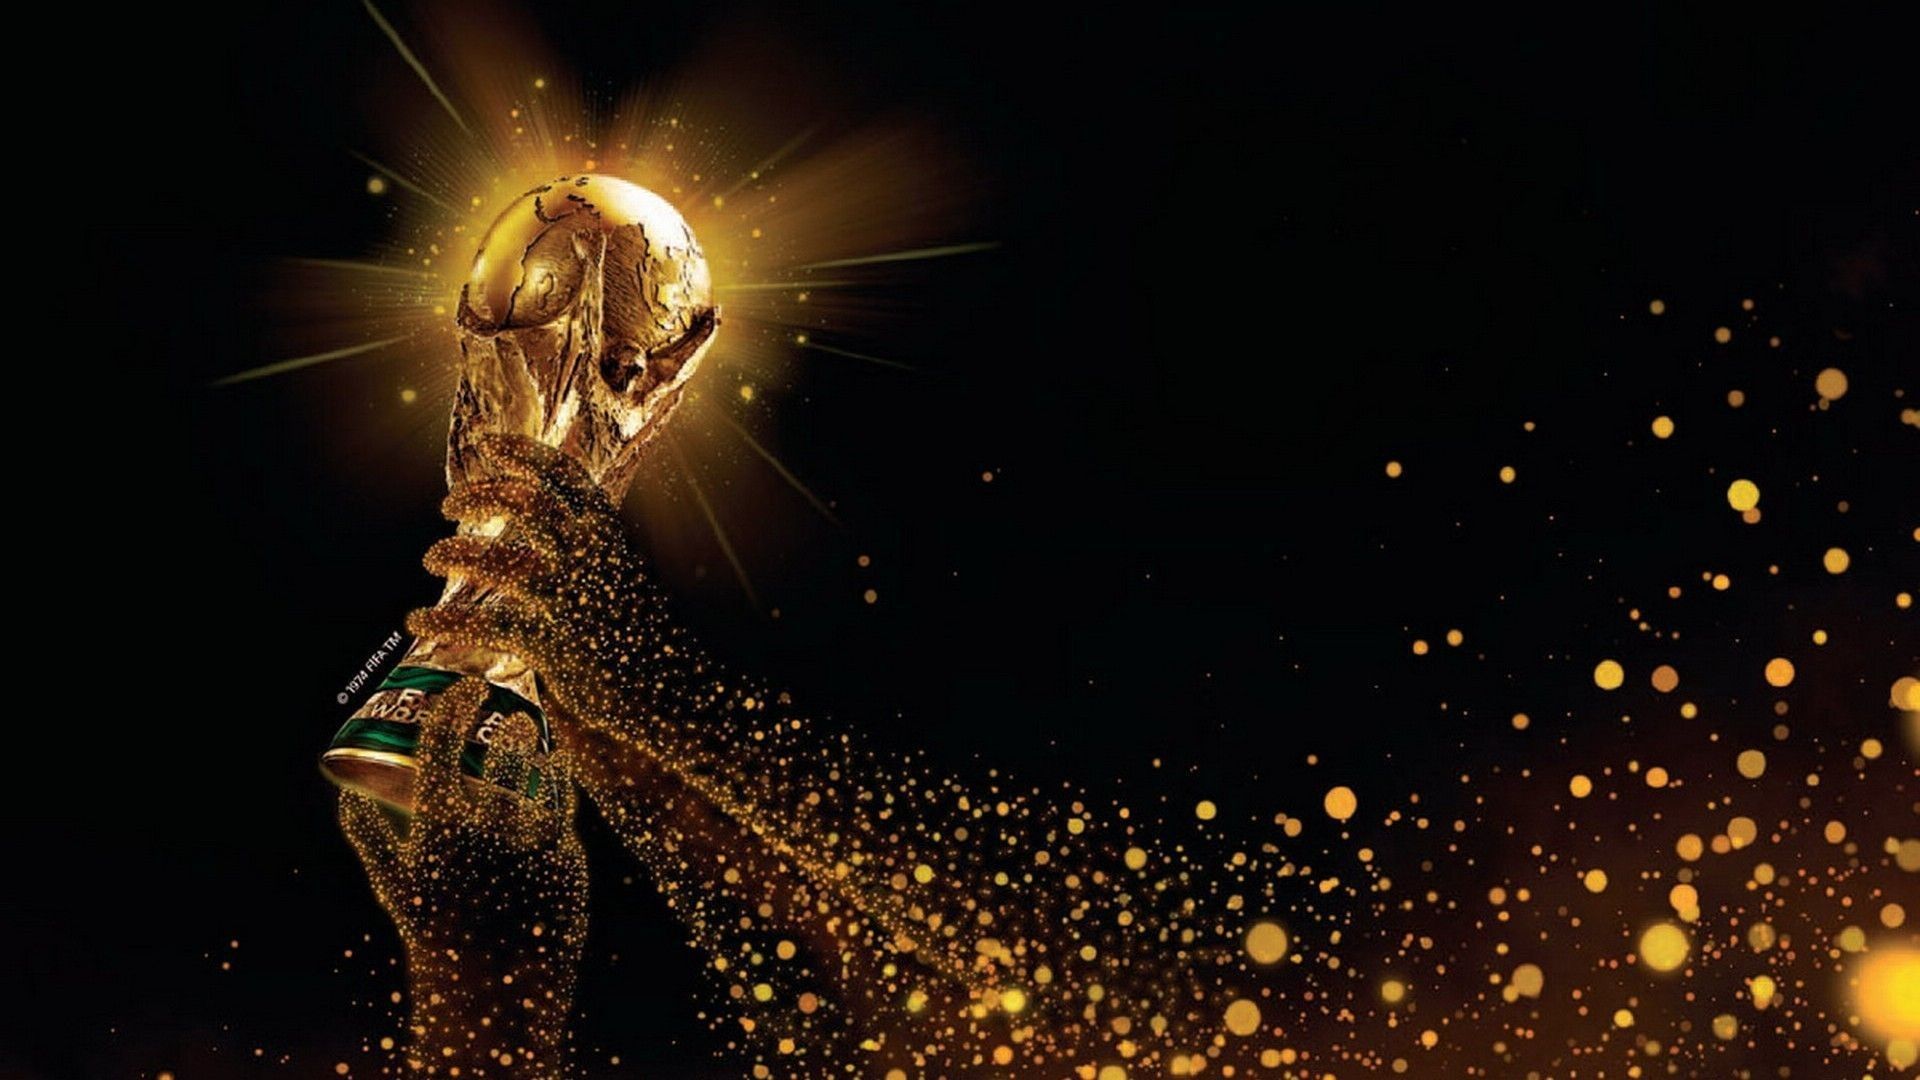 Fifa World Cup Wallpapers